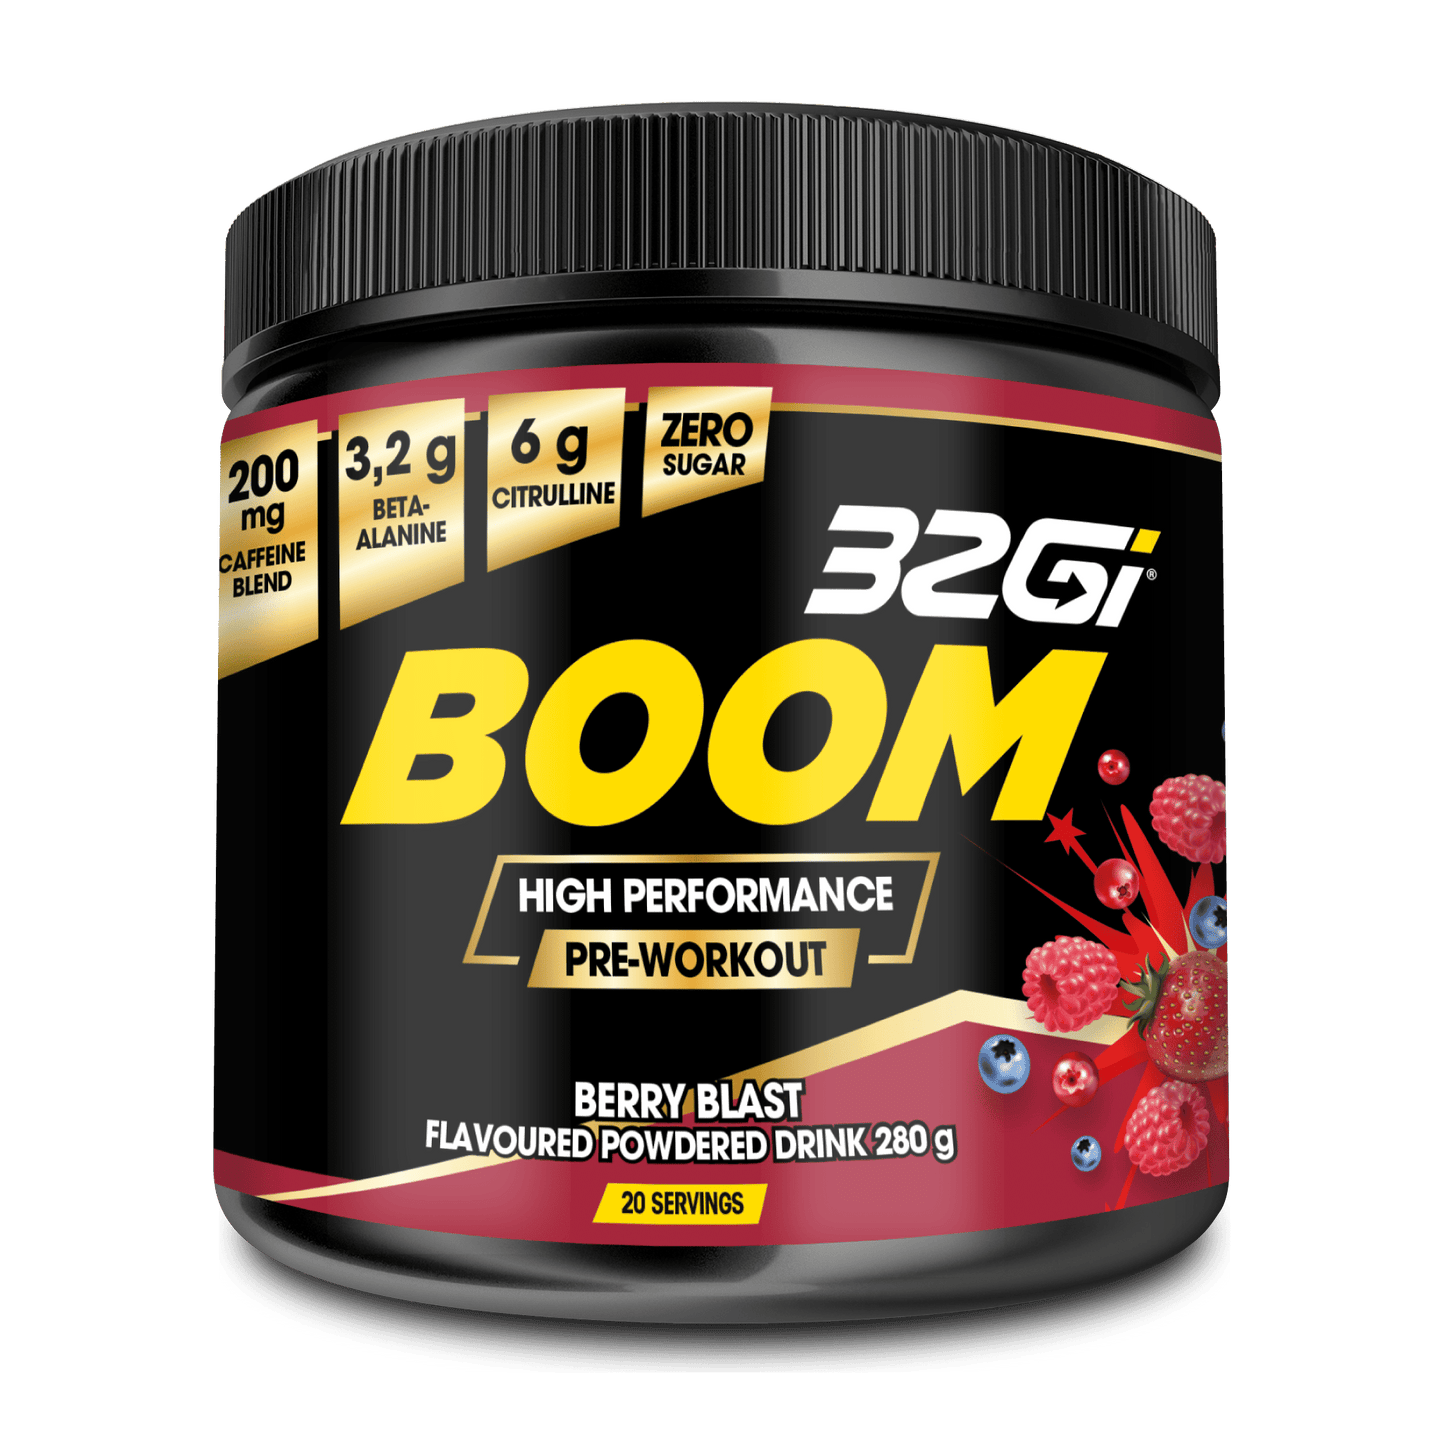 BOOM - High-Performance Pre-Workout